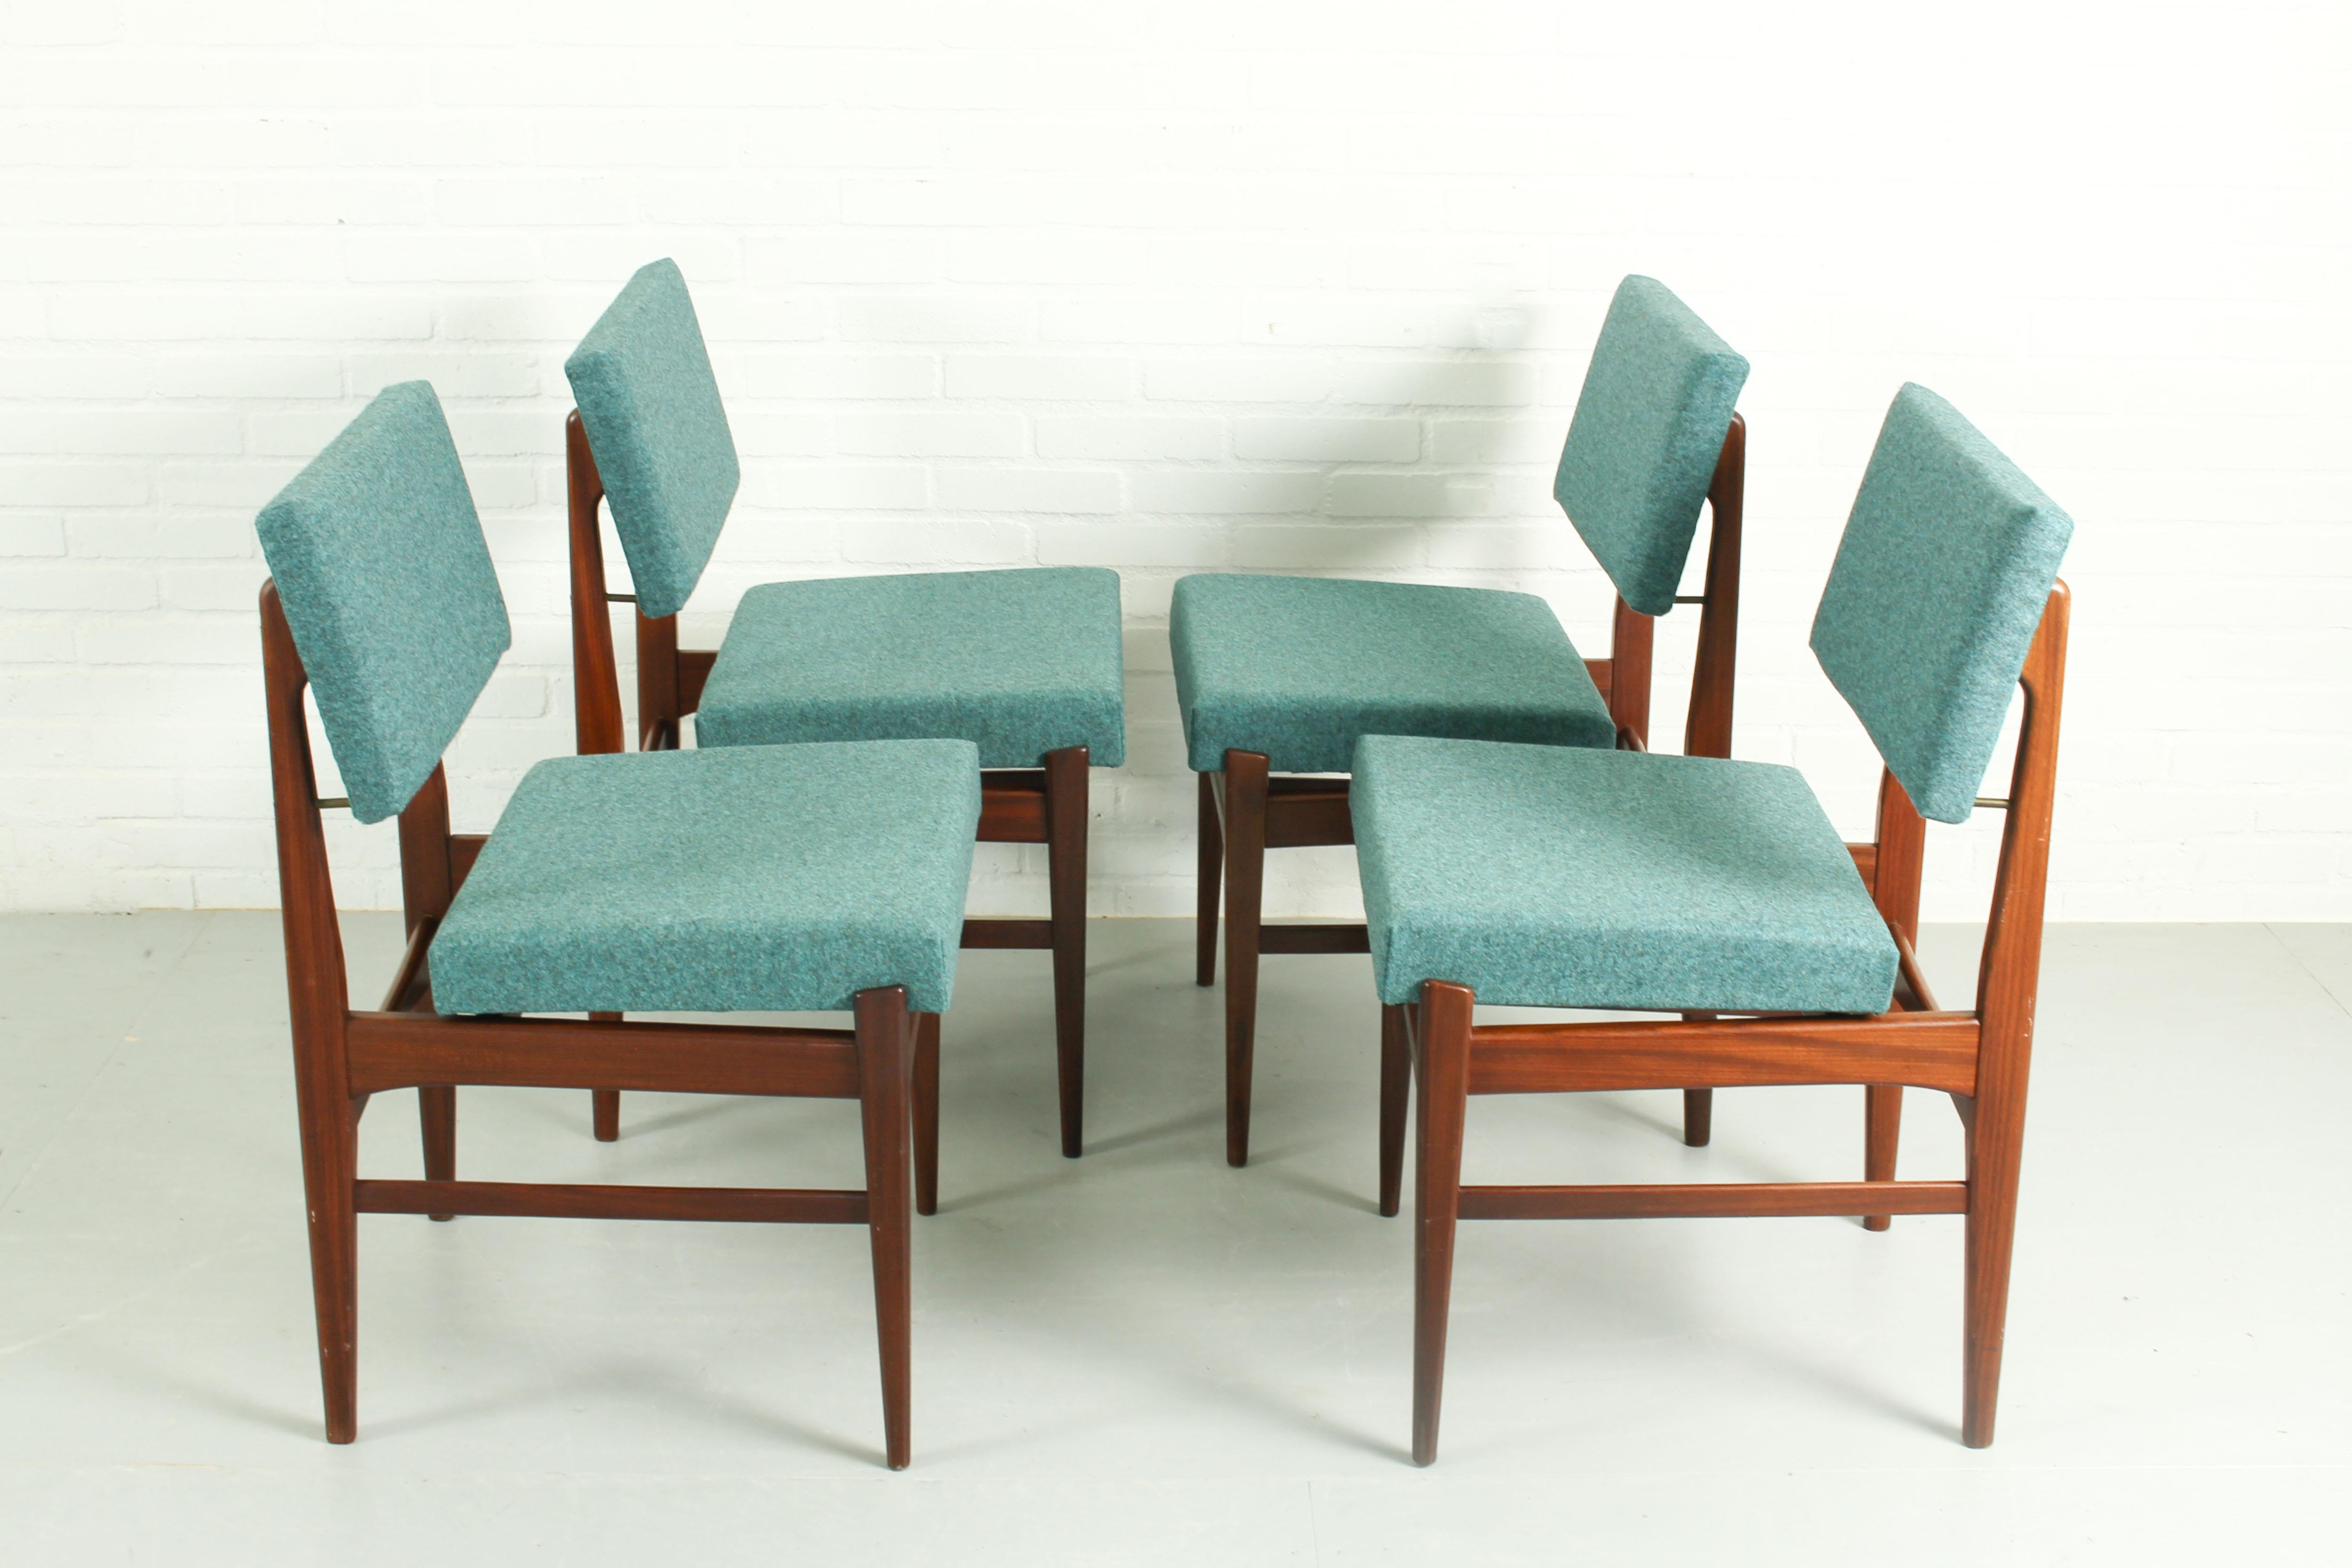 Louis van Teeffelen Wébé Dining chairs and Dining Table by Louis van Teeffelen for Wébé, Dutch Design 1950s. 4 teak dining chairs, model Upspula in blue green melange wool fabric. Teak table extendable. Wébé was a Dutch company from the mid century